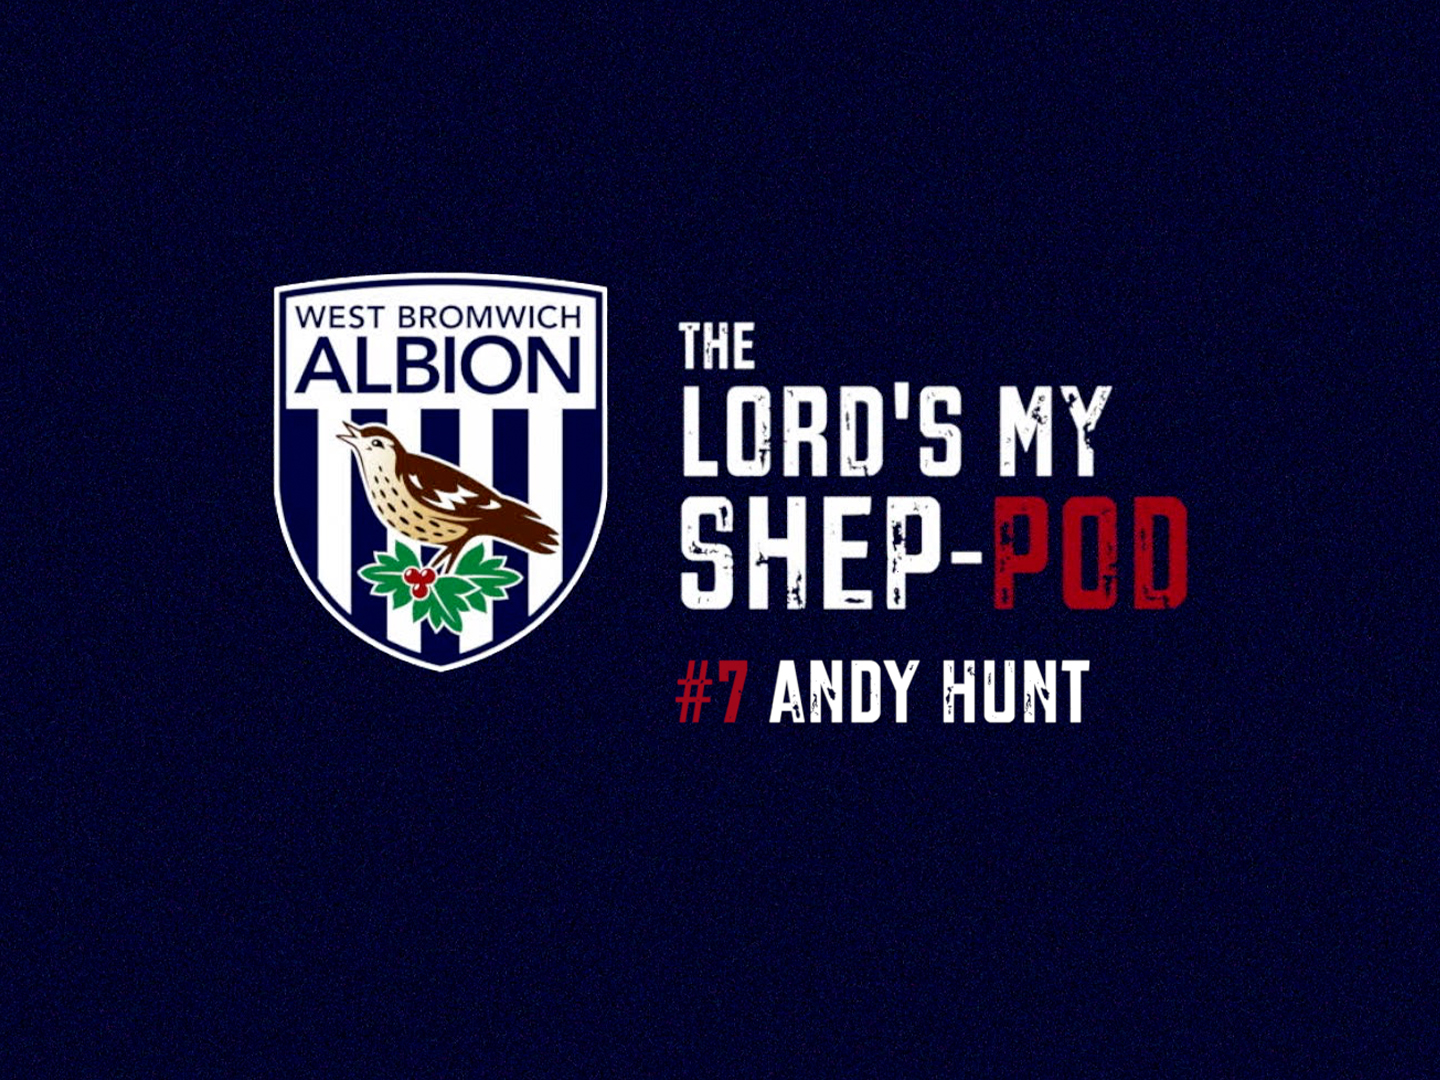 The Lord's My Shep-Pod Graphic for Andy Hunt's episode